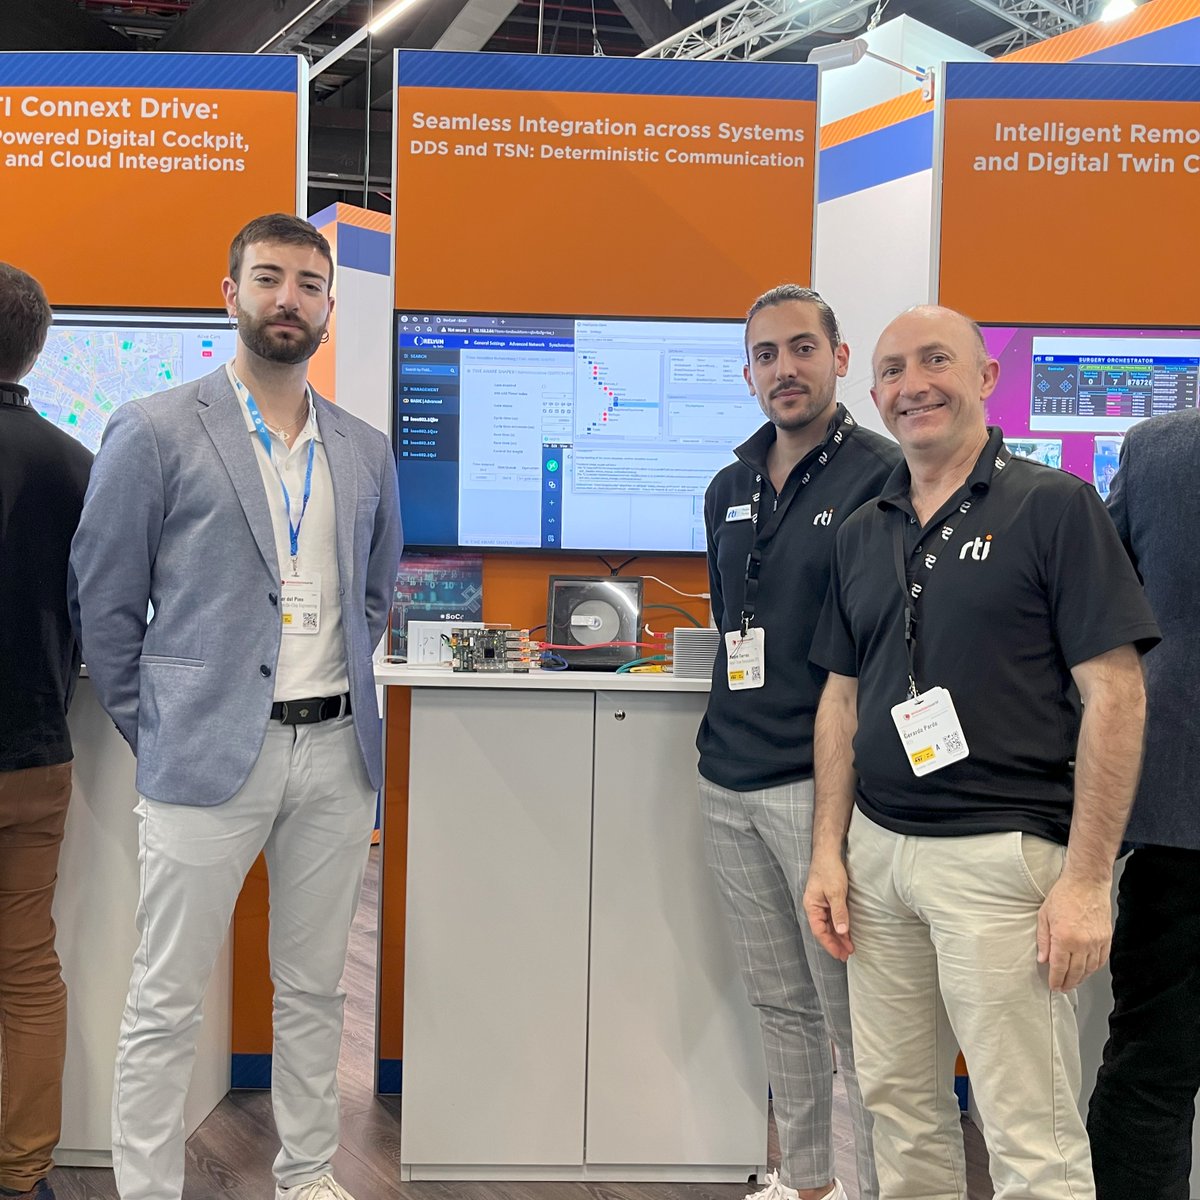 What a great first day at #EmbeddedWorld! Thanks to all who stopped by our booth (#4-421), attended Gerardo's session, and met with our experts to learn about Connext across use cases. See you tomorrow!